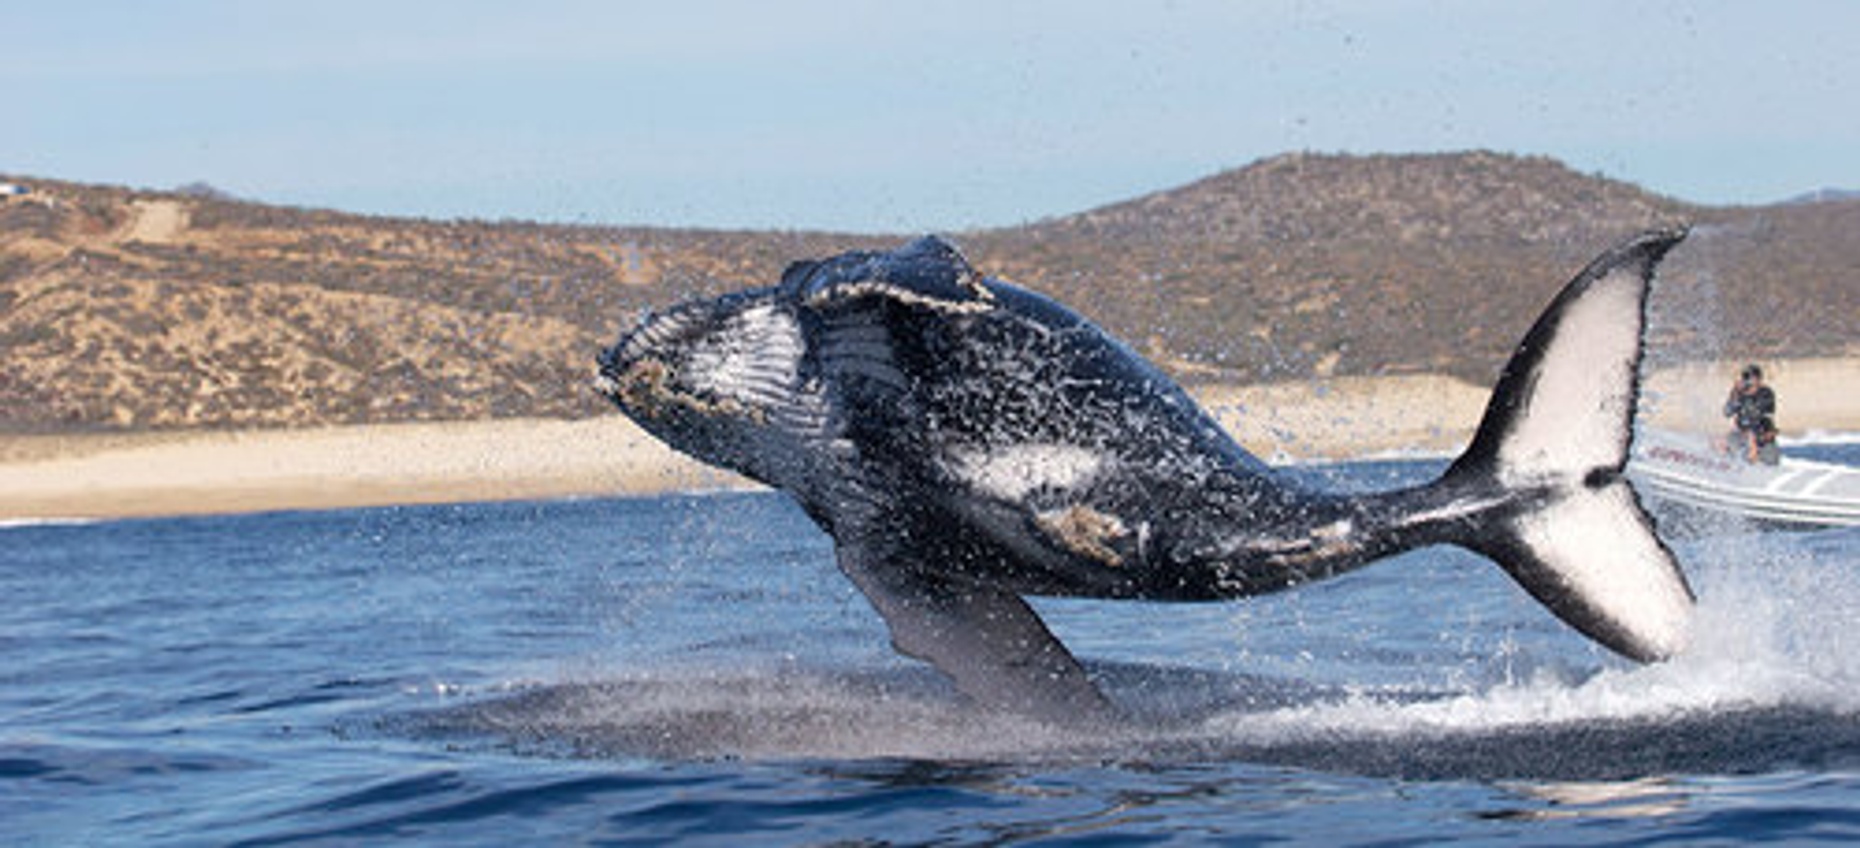 Whale-Watching Tour in Cabo San Lucas